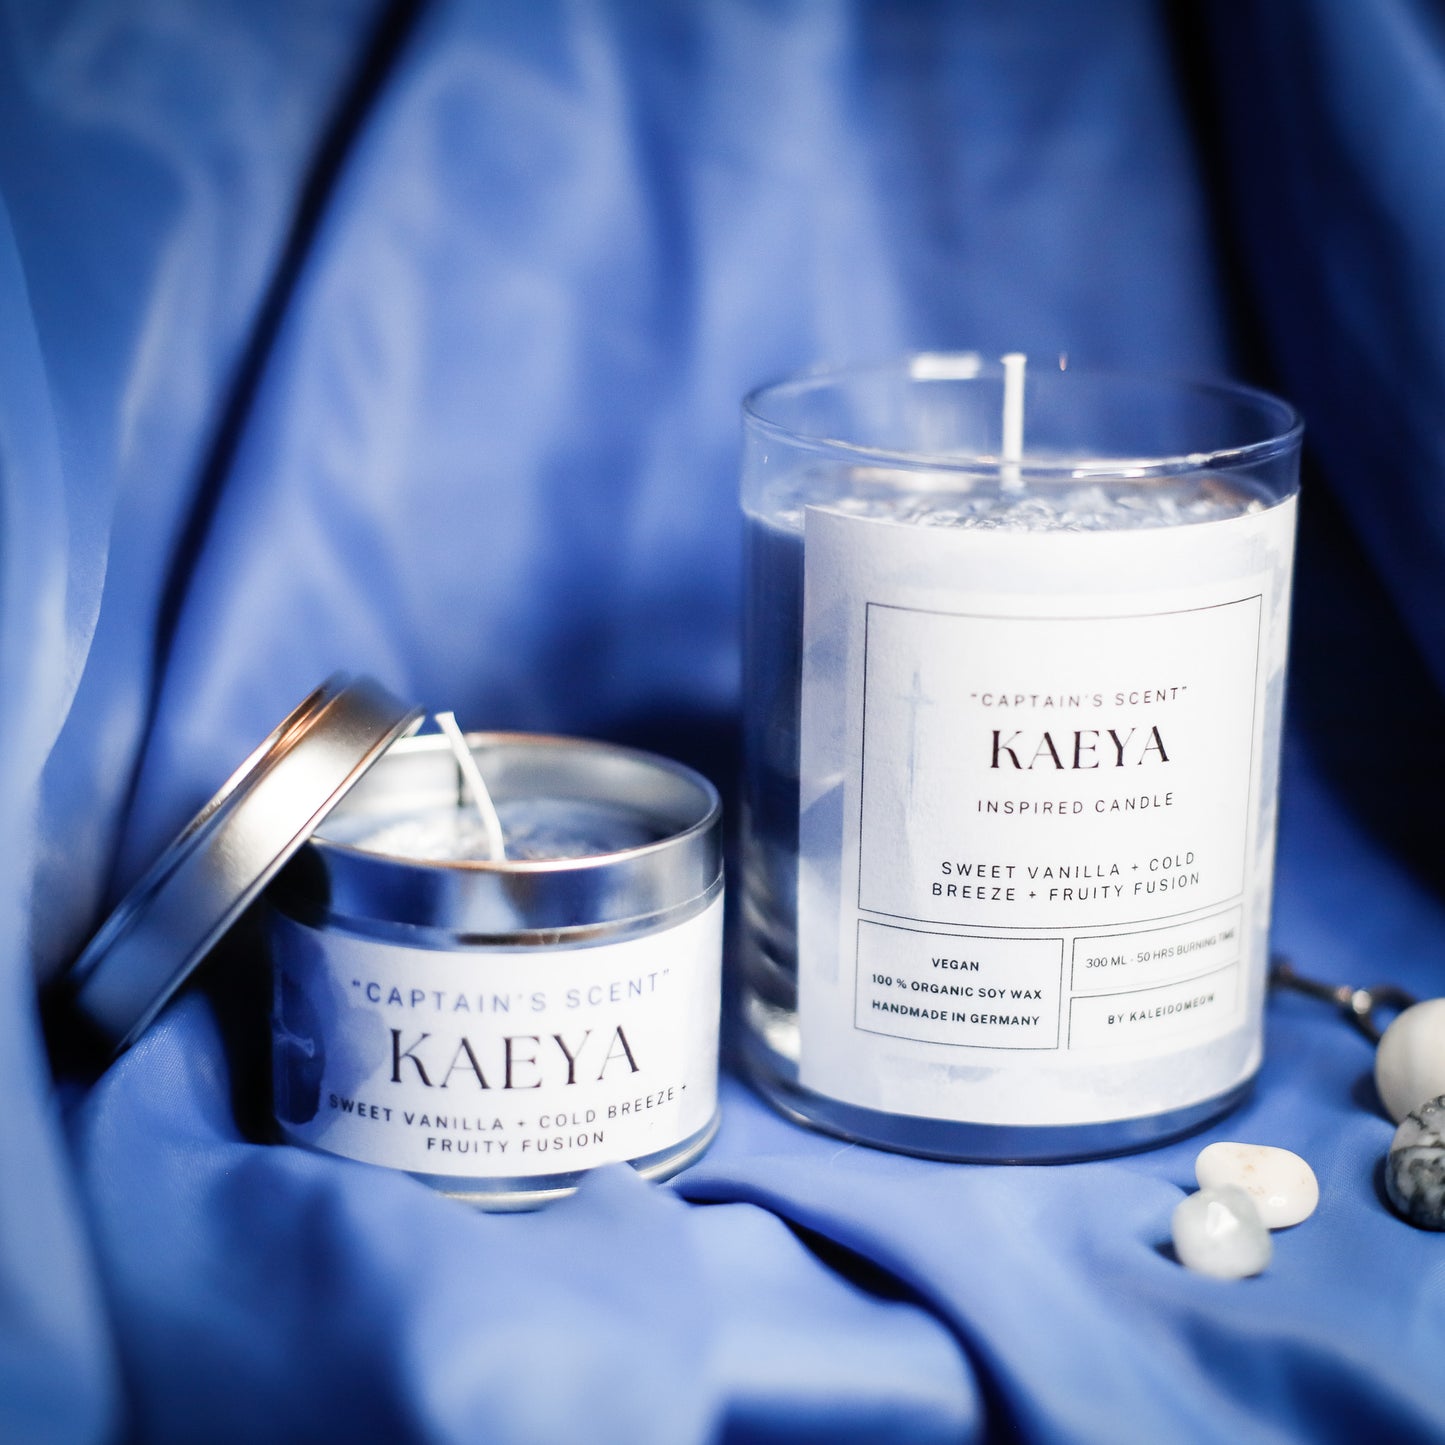 Kaeya inspired candle - 'Captain's Scent' Genshin Impact inspired Candle 300 ML